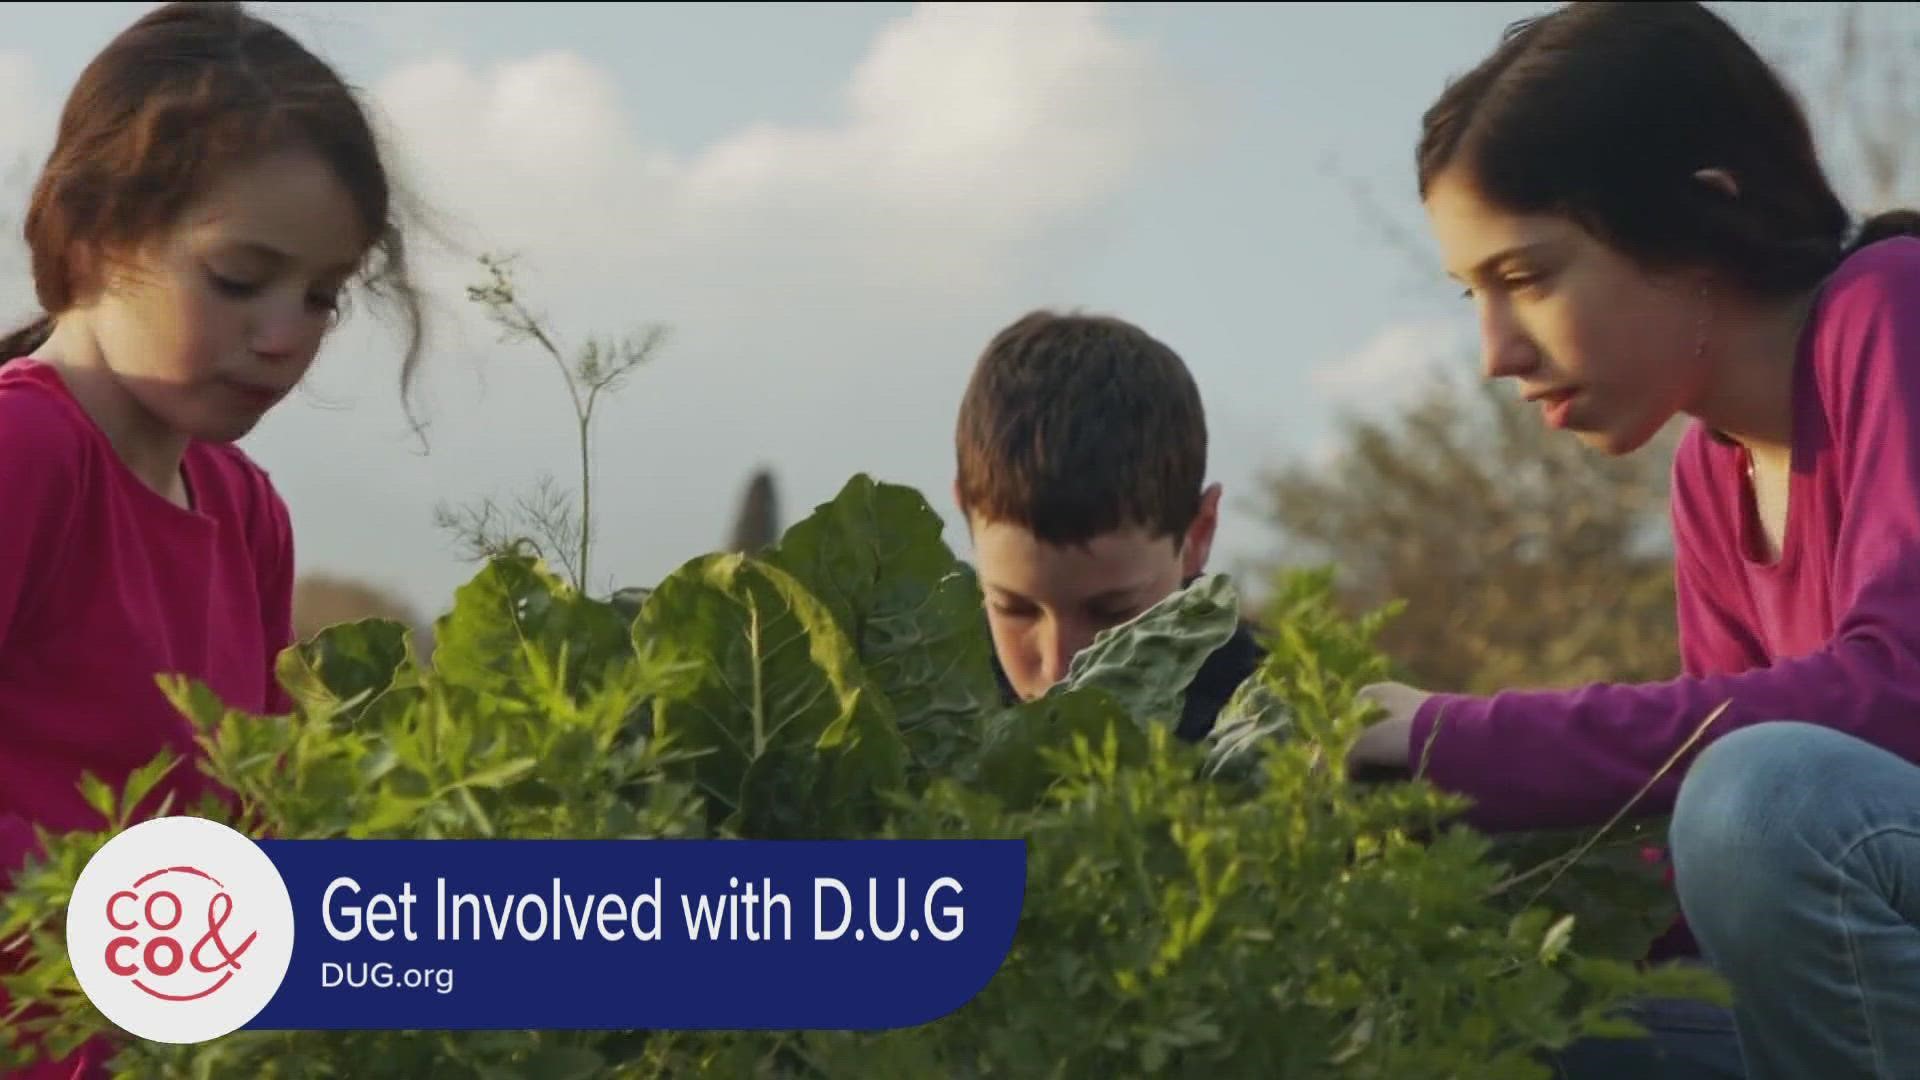 Visit DUG.org to find a garden near you and to get involved with volunteer options, classes and community events.